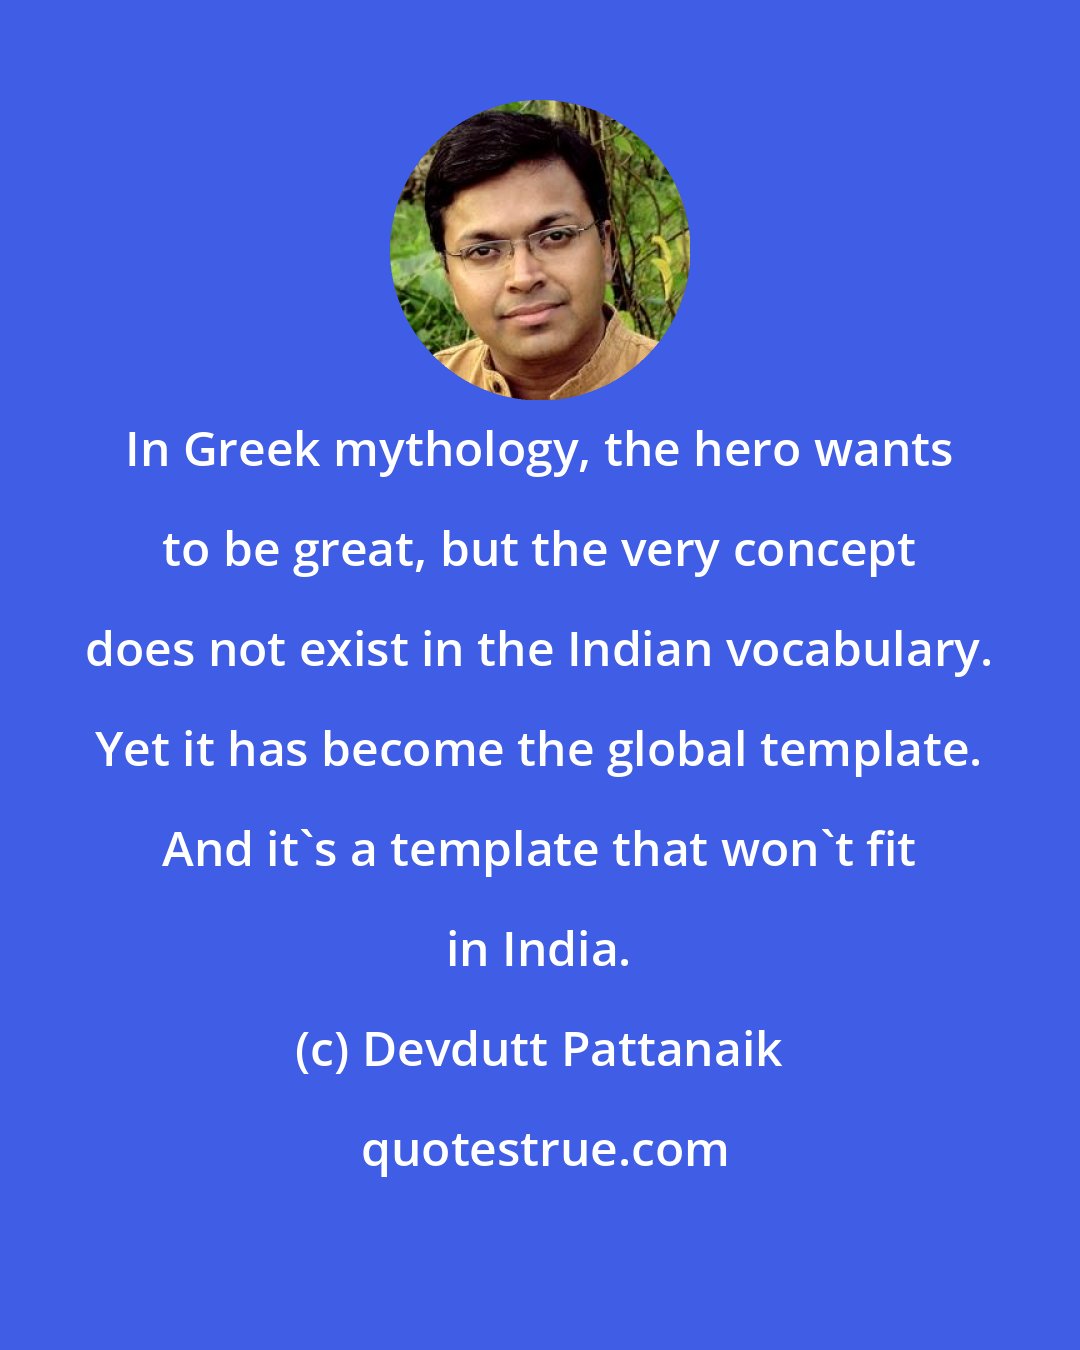 Devdutt Pattanaik: In Greek mythology, the hero wants to be great, but the very concept does not exist in the Indian vocabulary. Yet it has become the global template. And it's a template that won't fit in India.